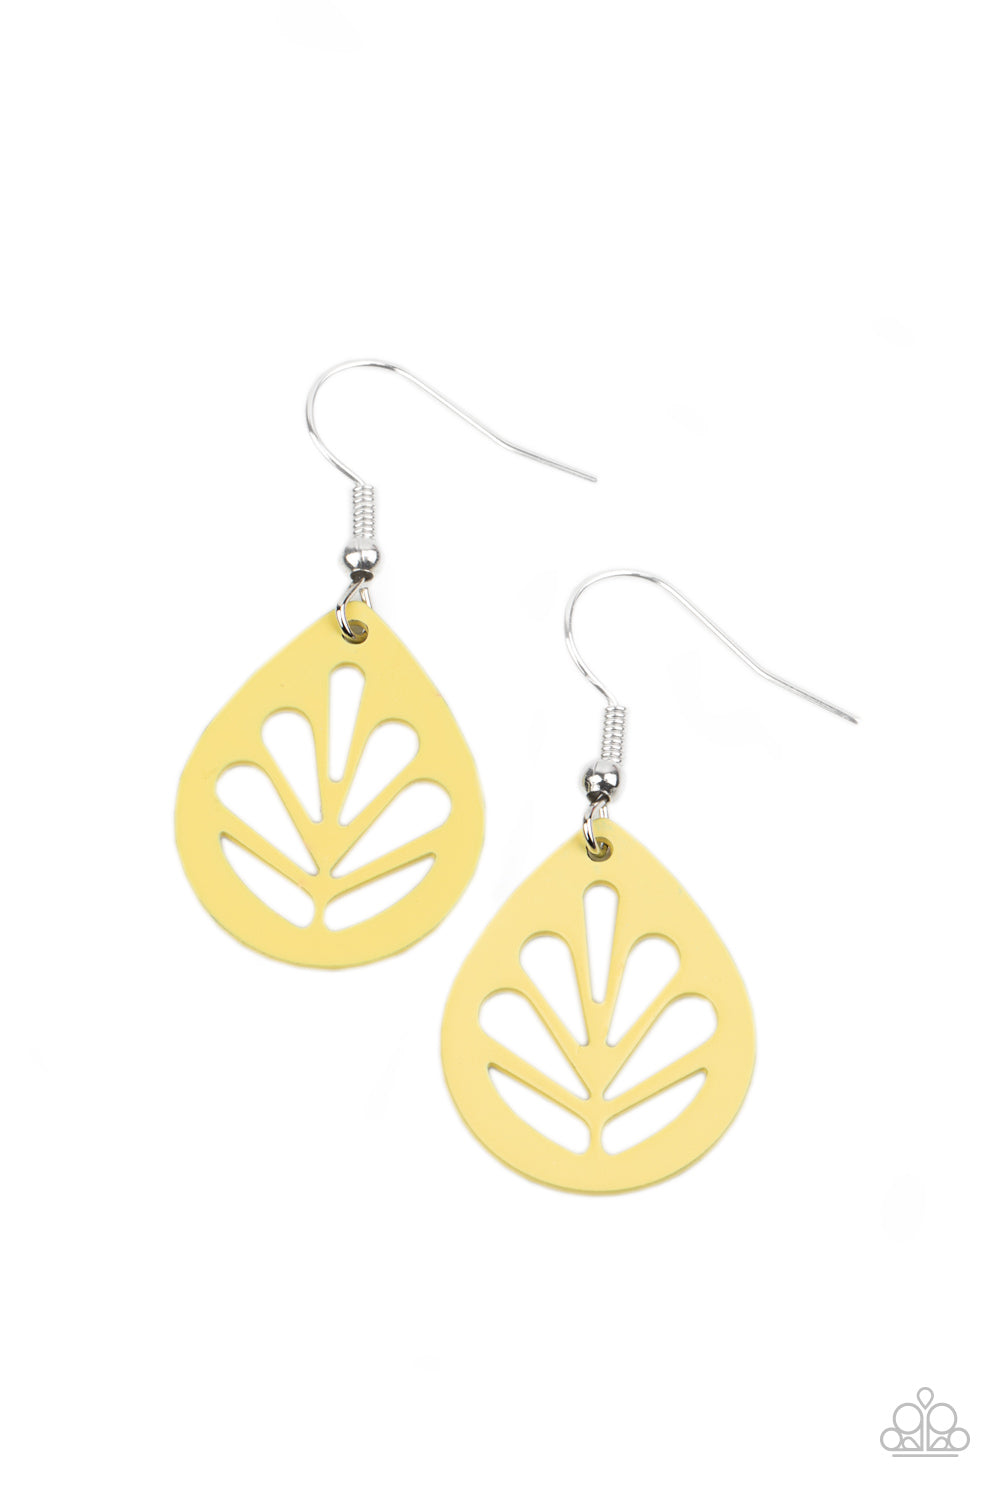 Paparazzi LEAF Yourself Wide Open Yellow Earrings. Subscribe & Save. 